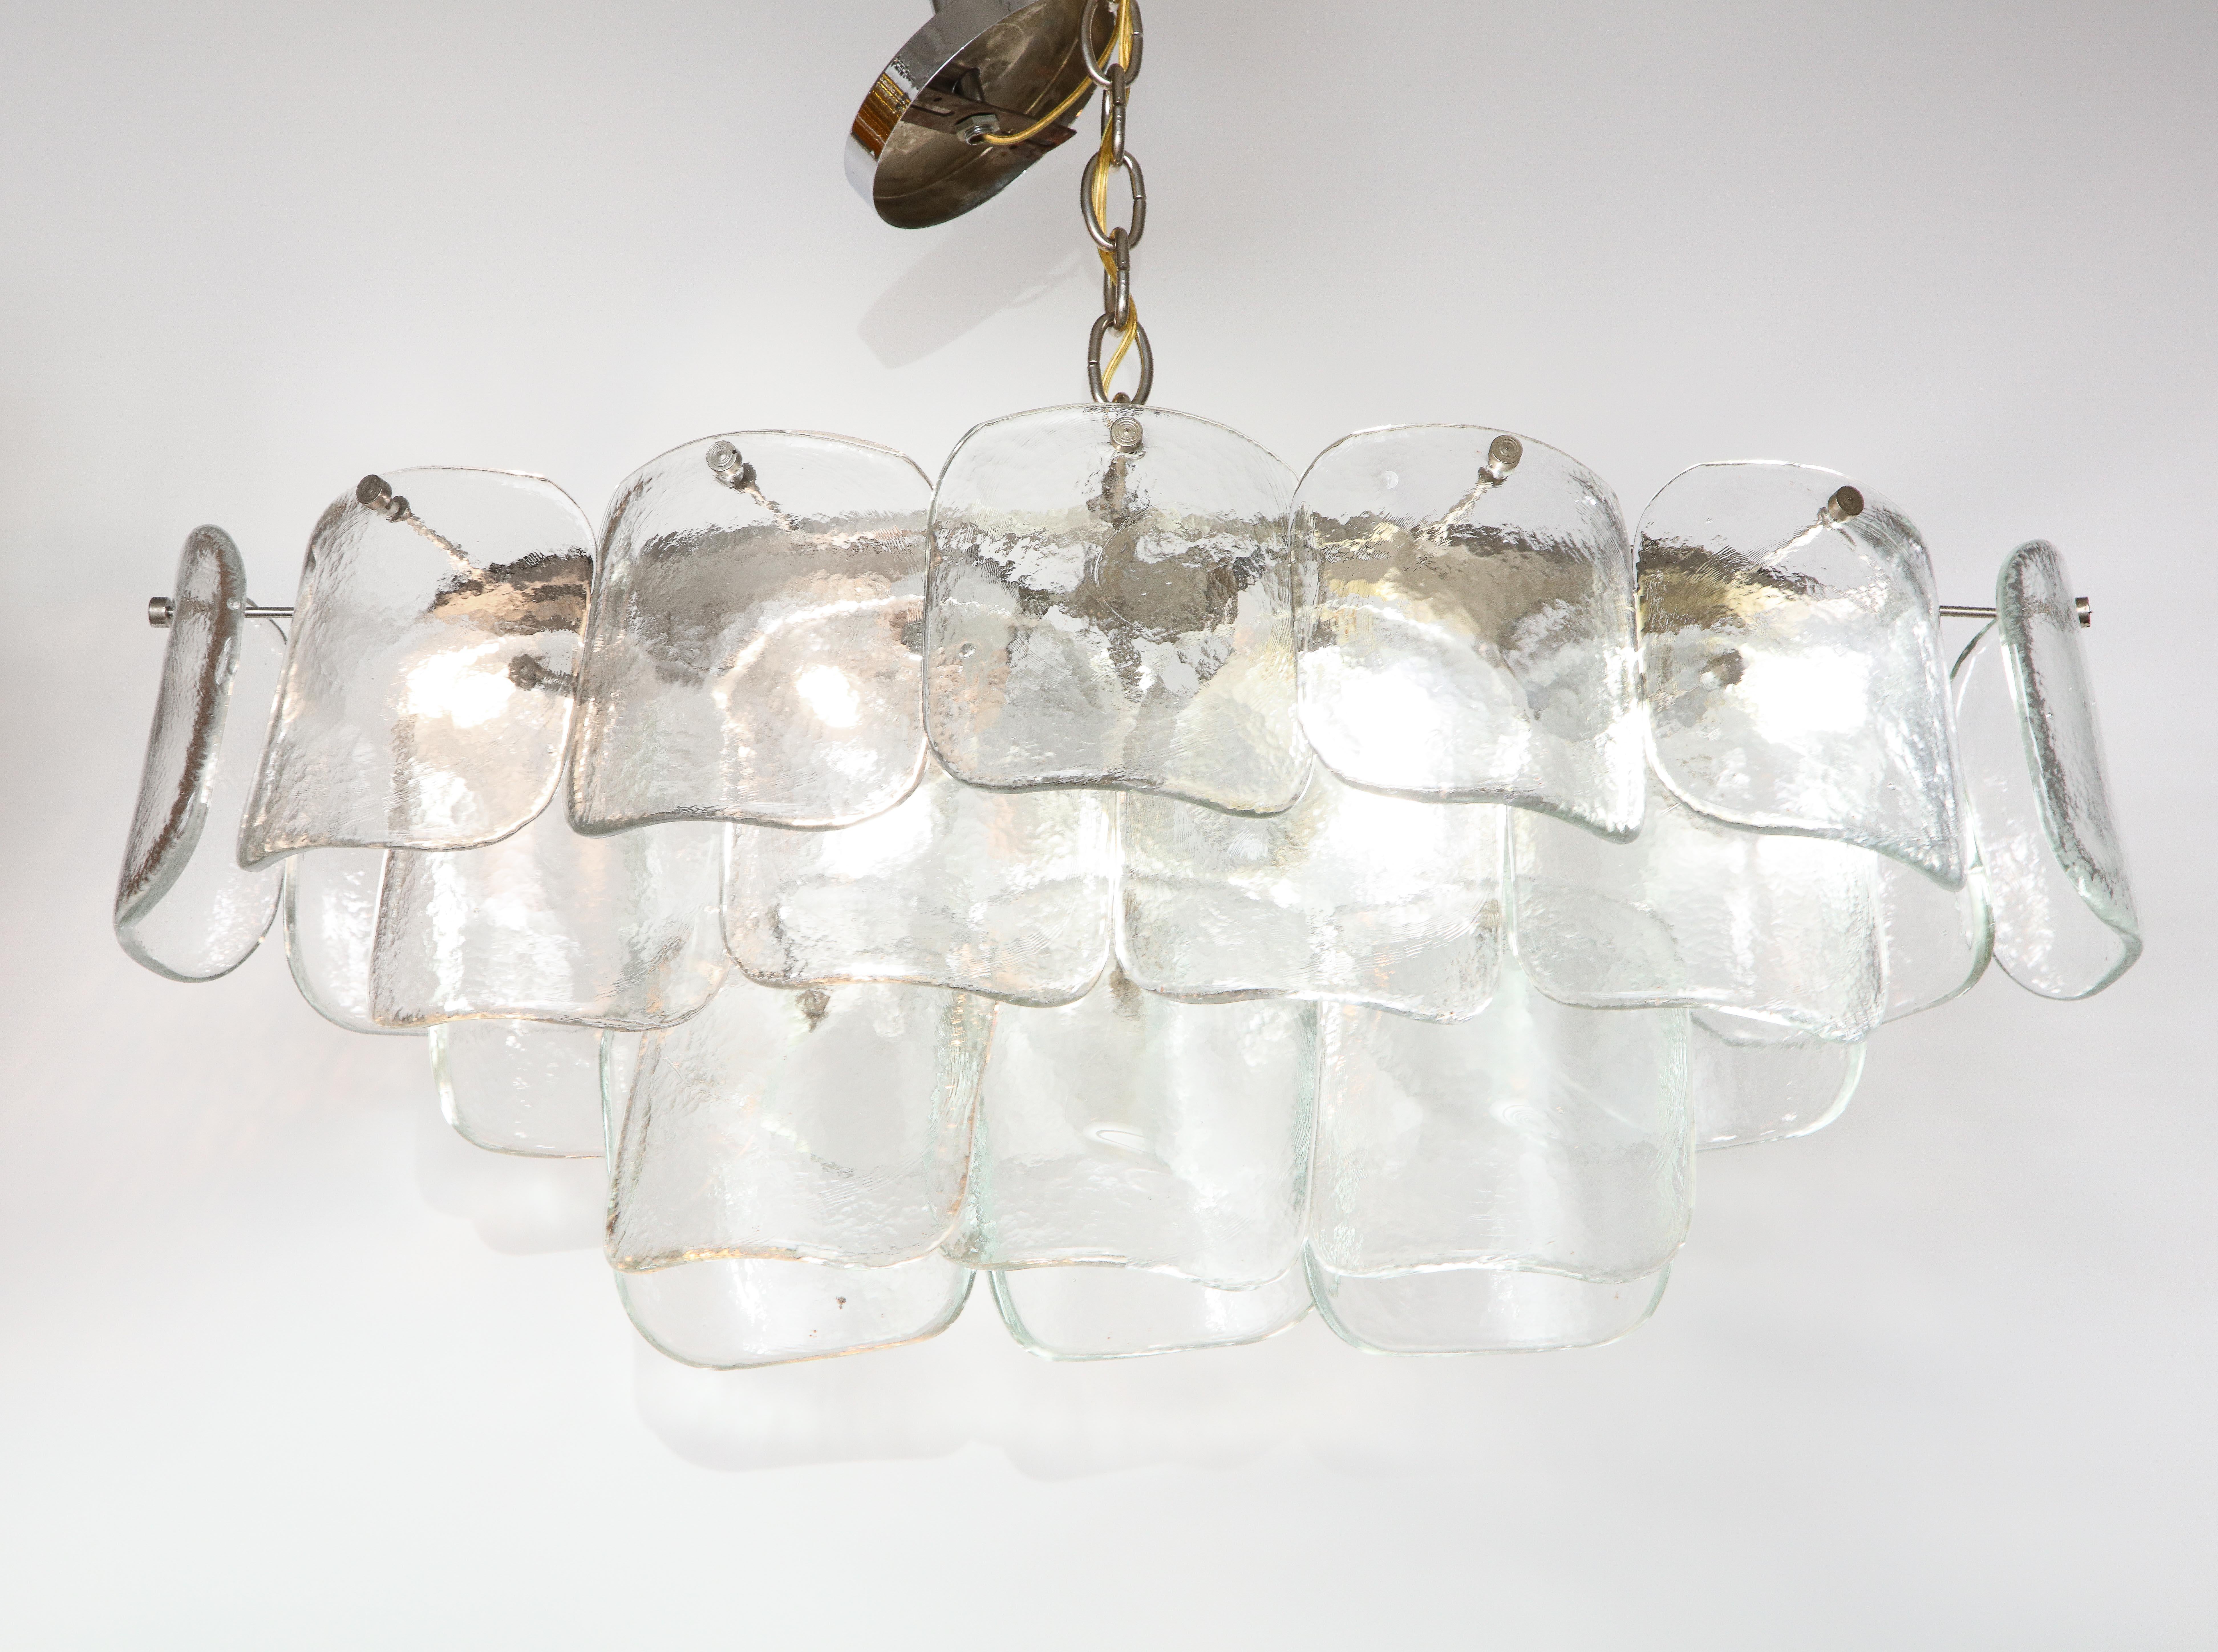 Stunning 1970s clear glass oval glass chandelier by Mazzega for Murano. With 26 glass discs and chrome frame and hardware, still retain the original Murano label.

Height including chain 67'' the height can be adjusted.